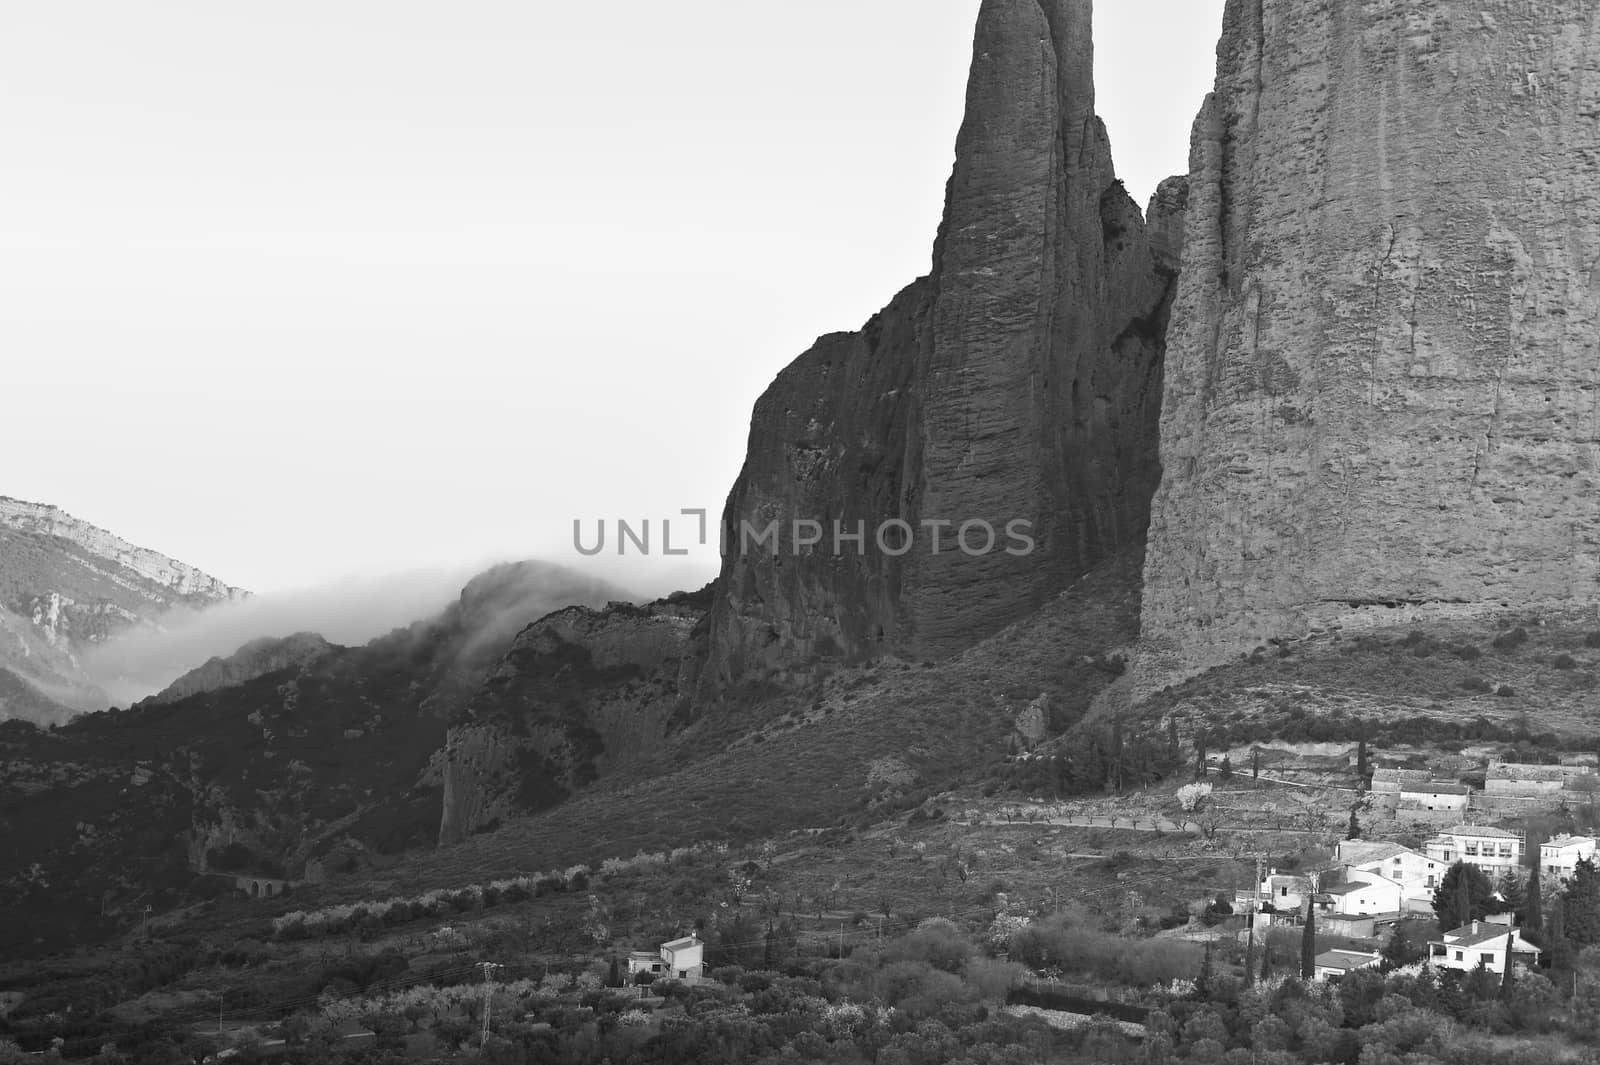 Deserted Spain in black and white. Spanish medieval village at the foot of the rocks in the Pereneus mountains